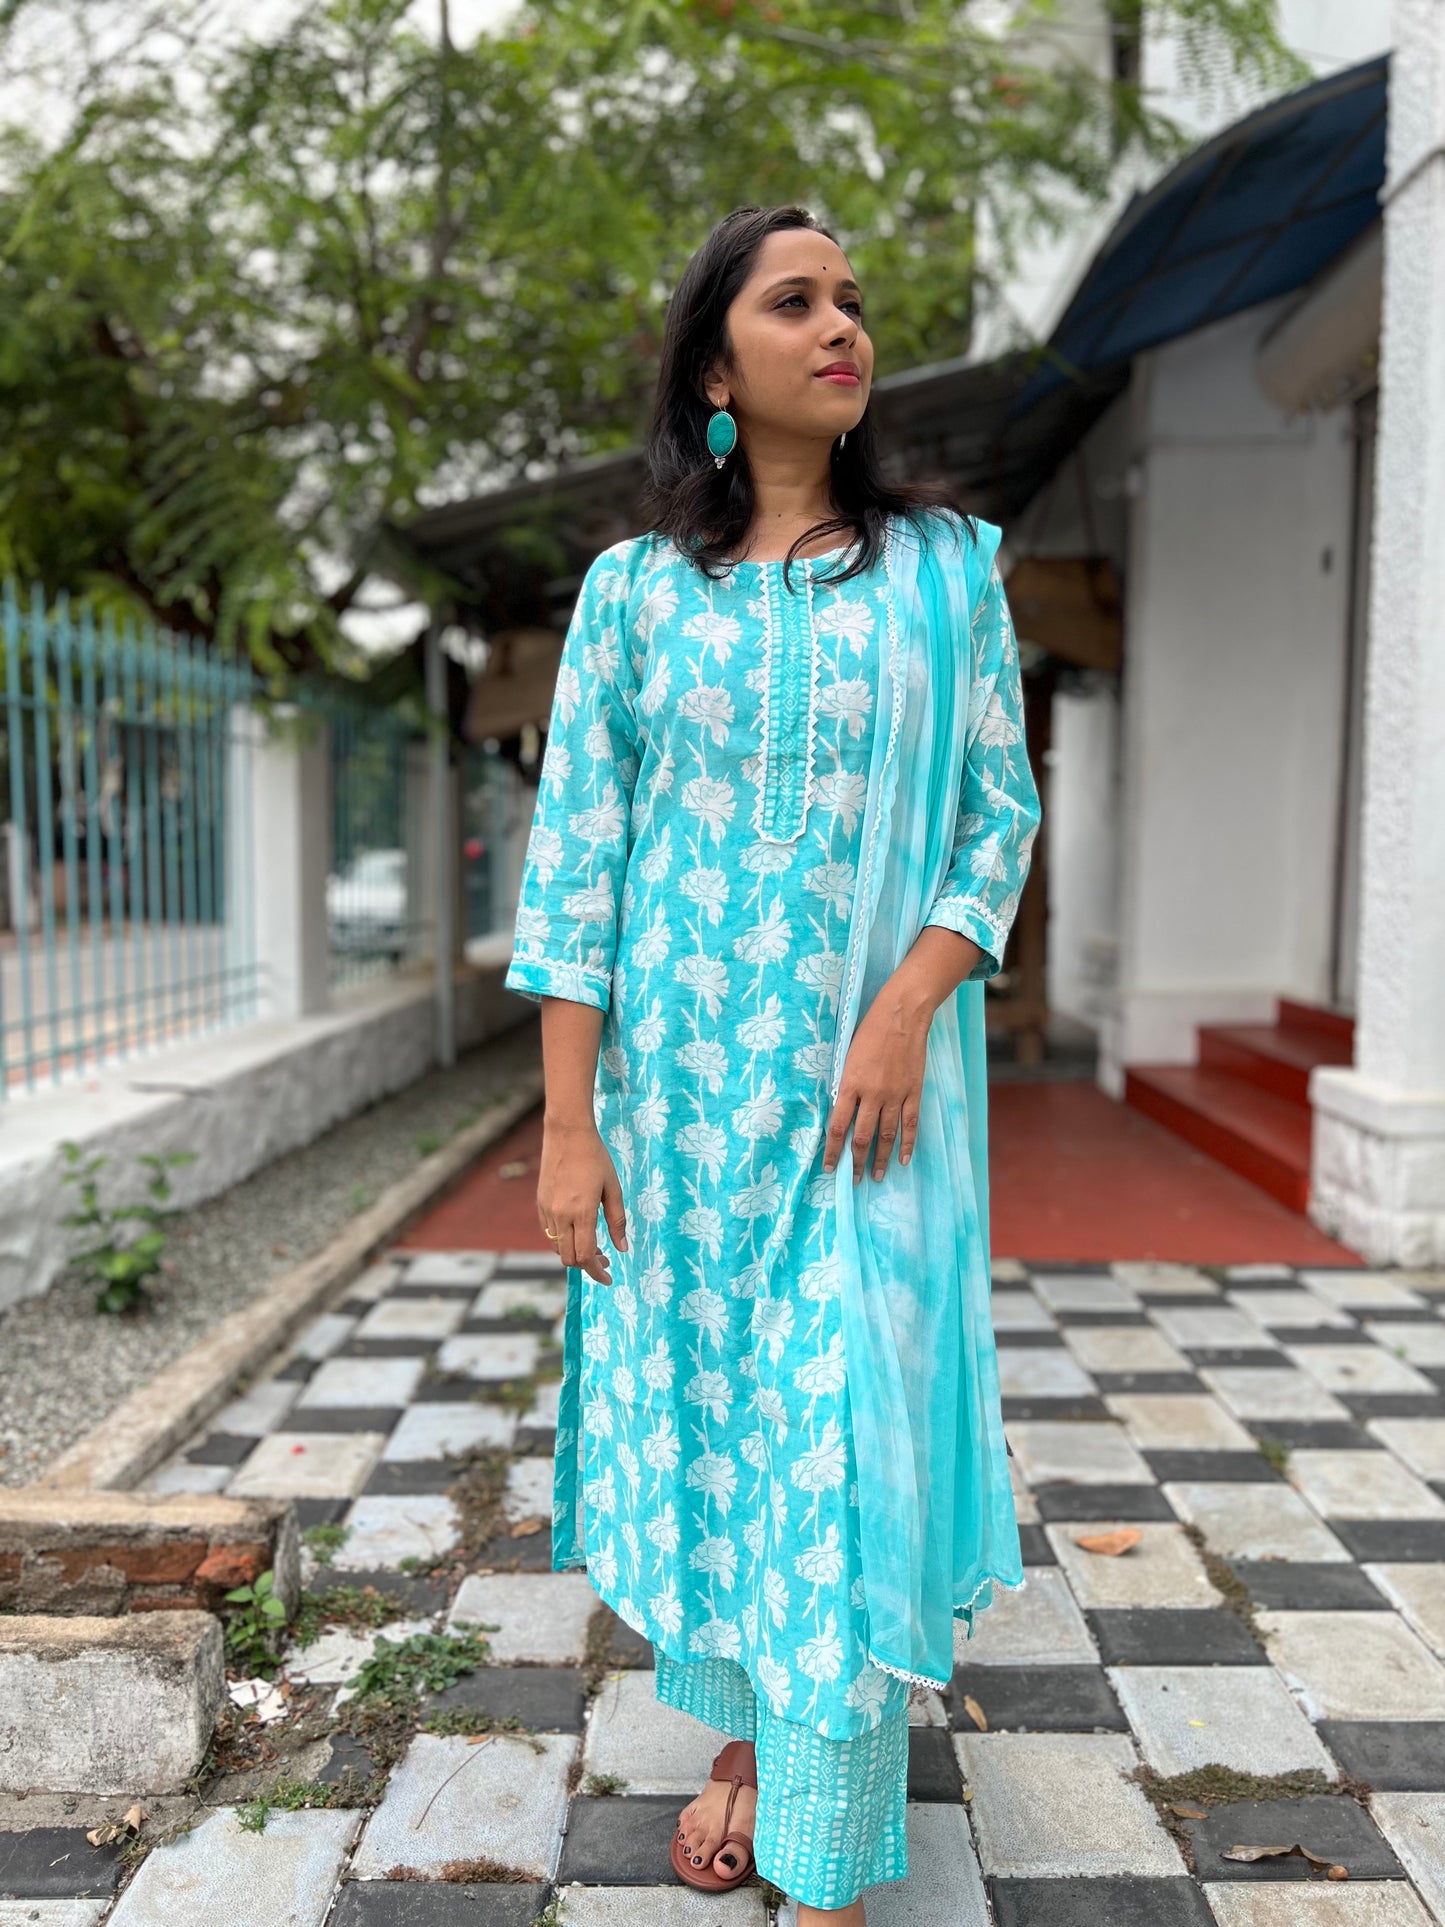 Southloom Stitched Chanderi Silk Salwar Set in Light Blue Colour with Floral Printed Design